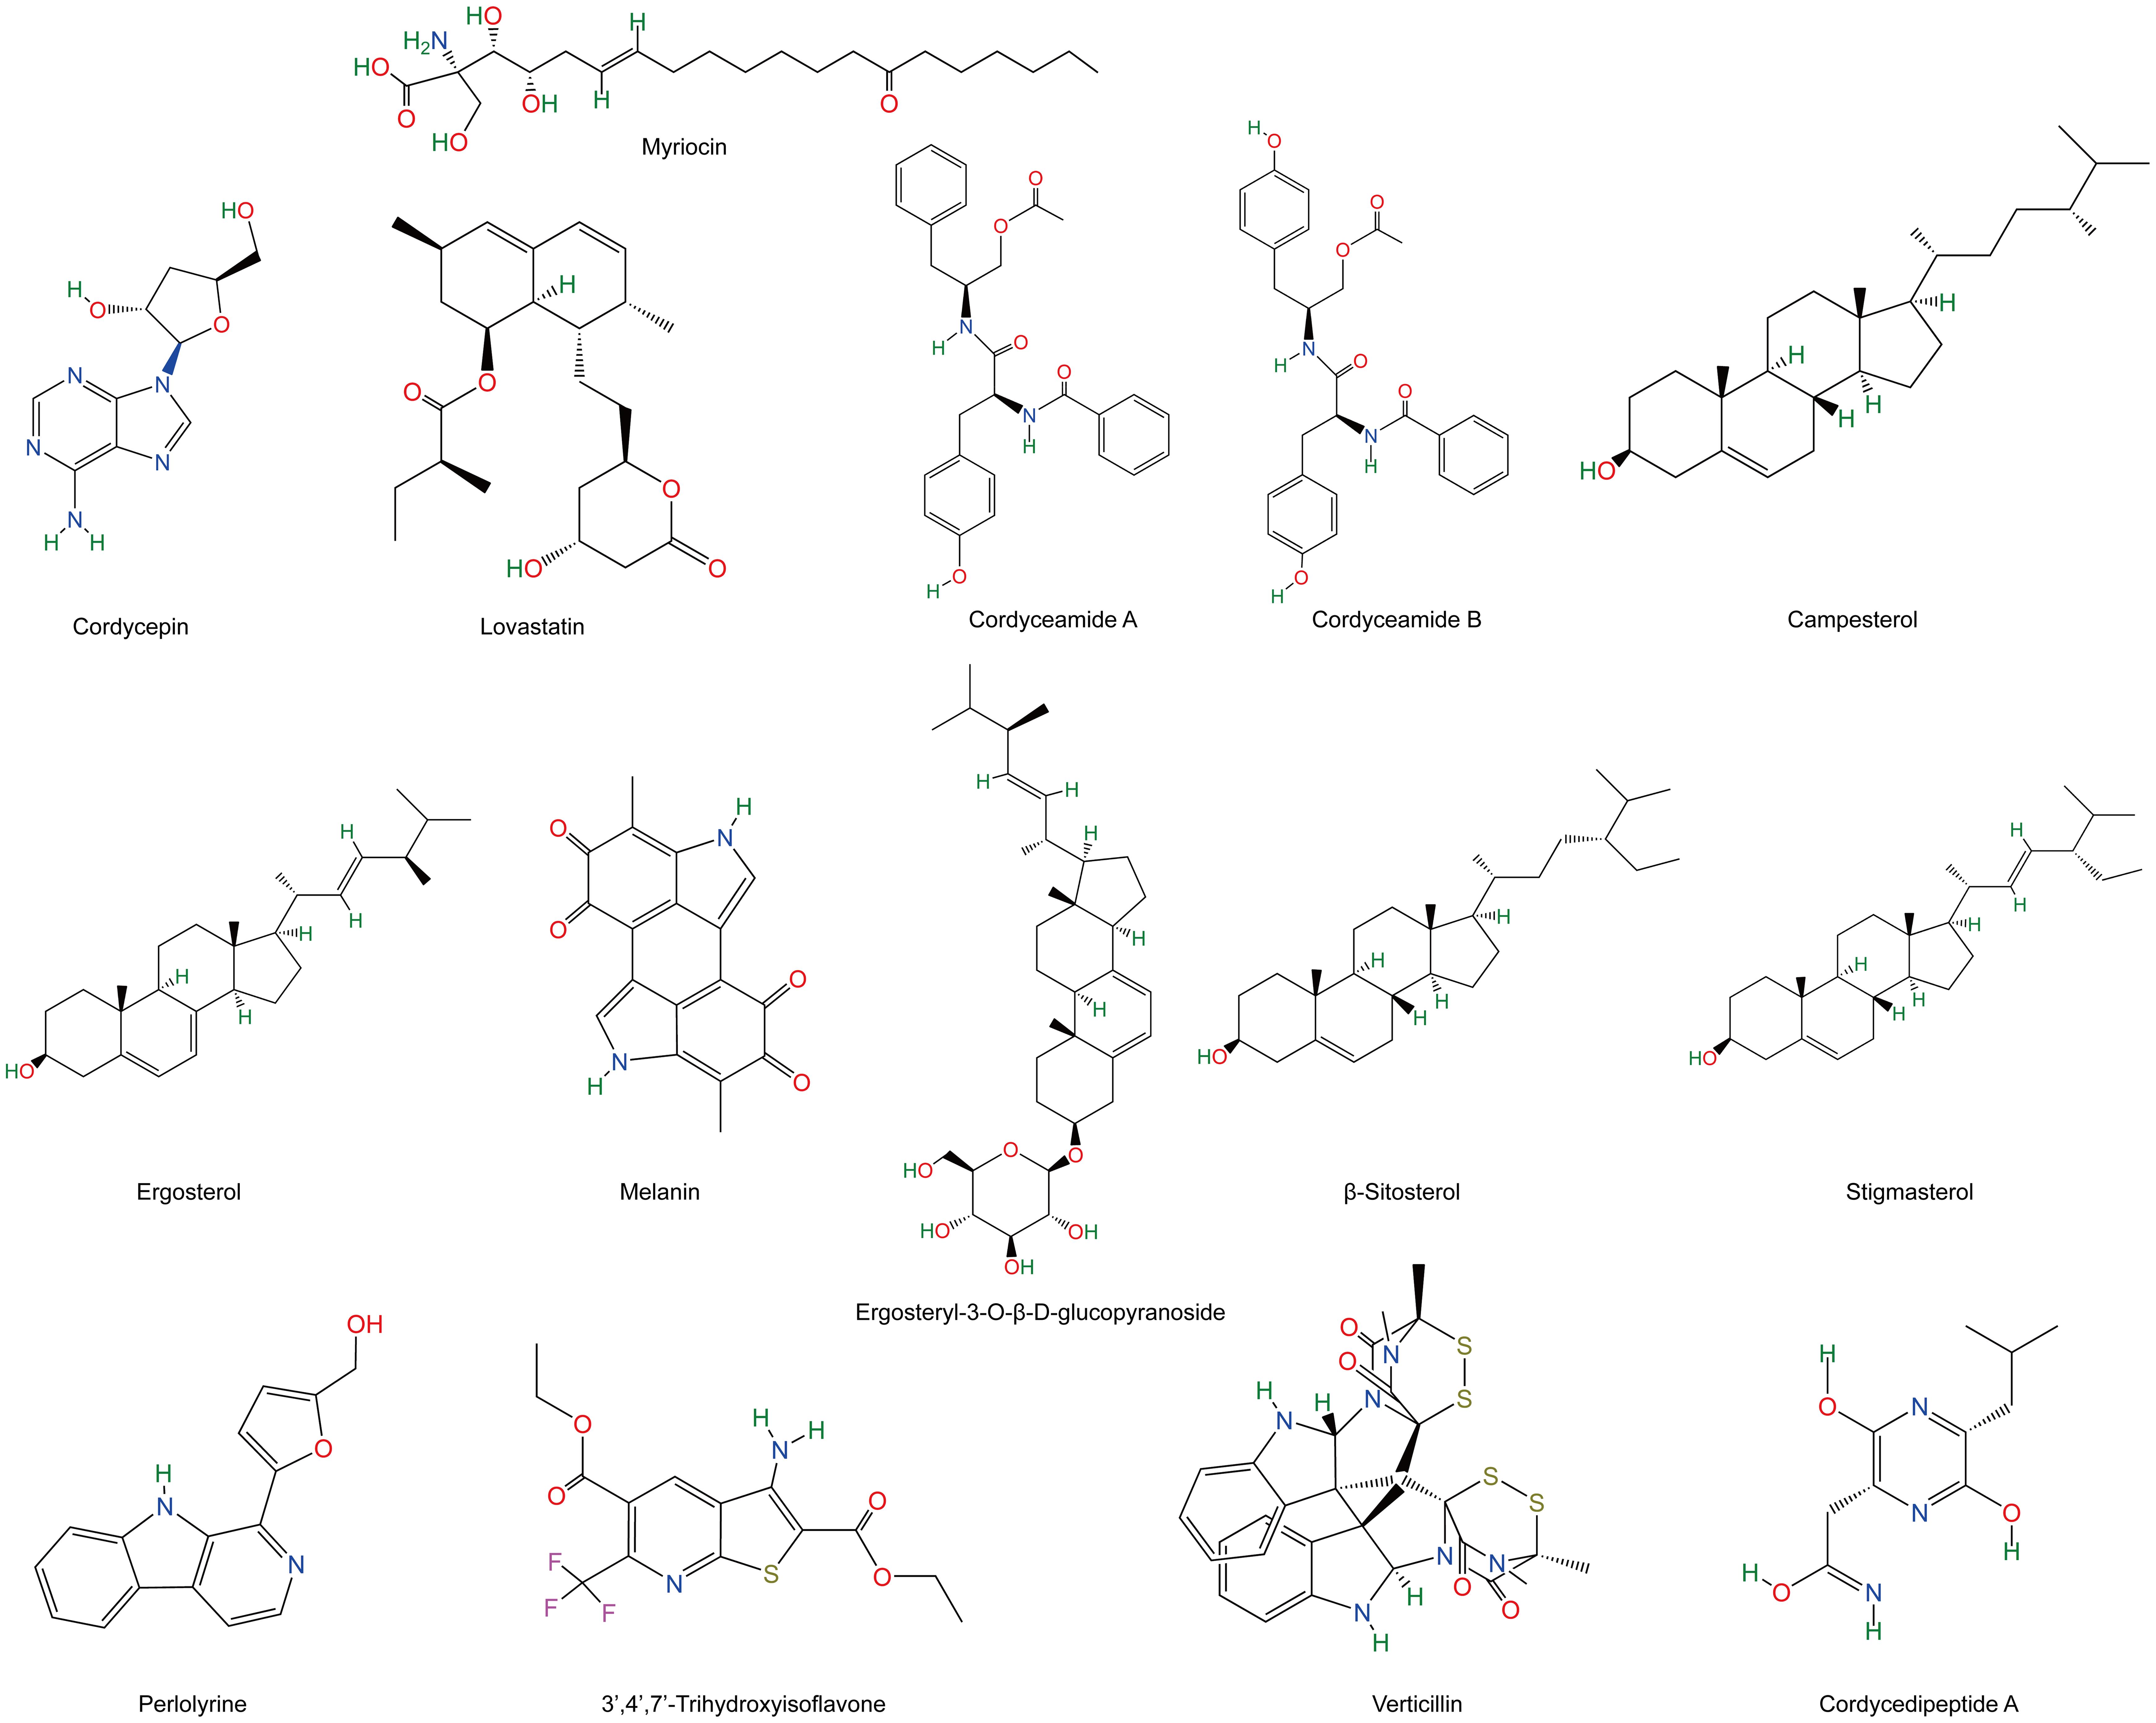 Chemical structures of some potential bioactive compounds identified from <italic>O. sinensis</italic> mycelia and cultures.